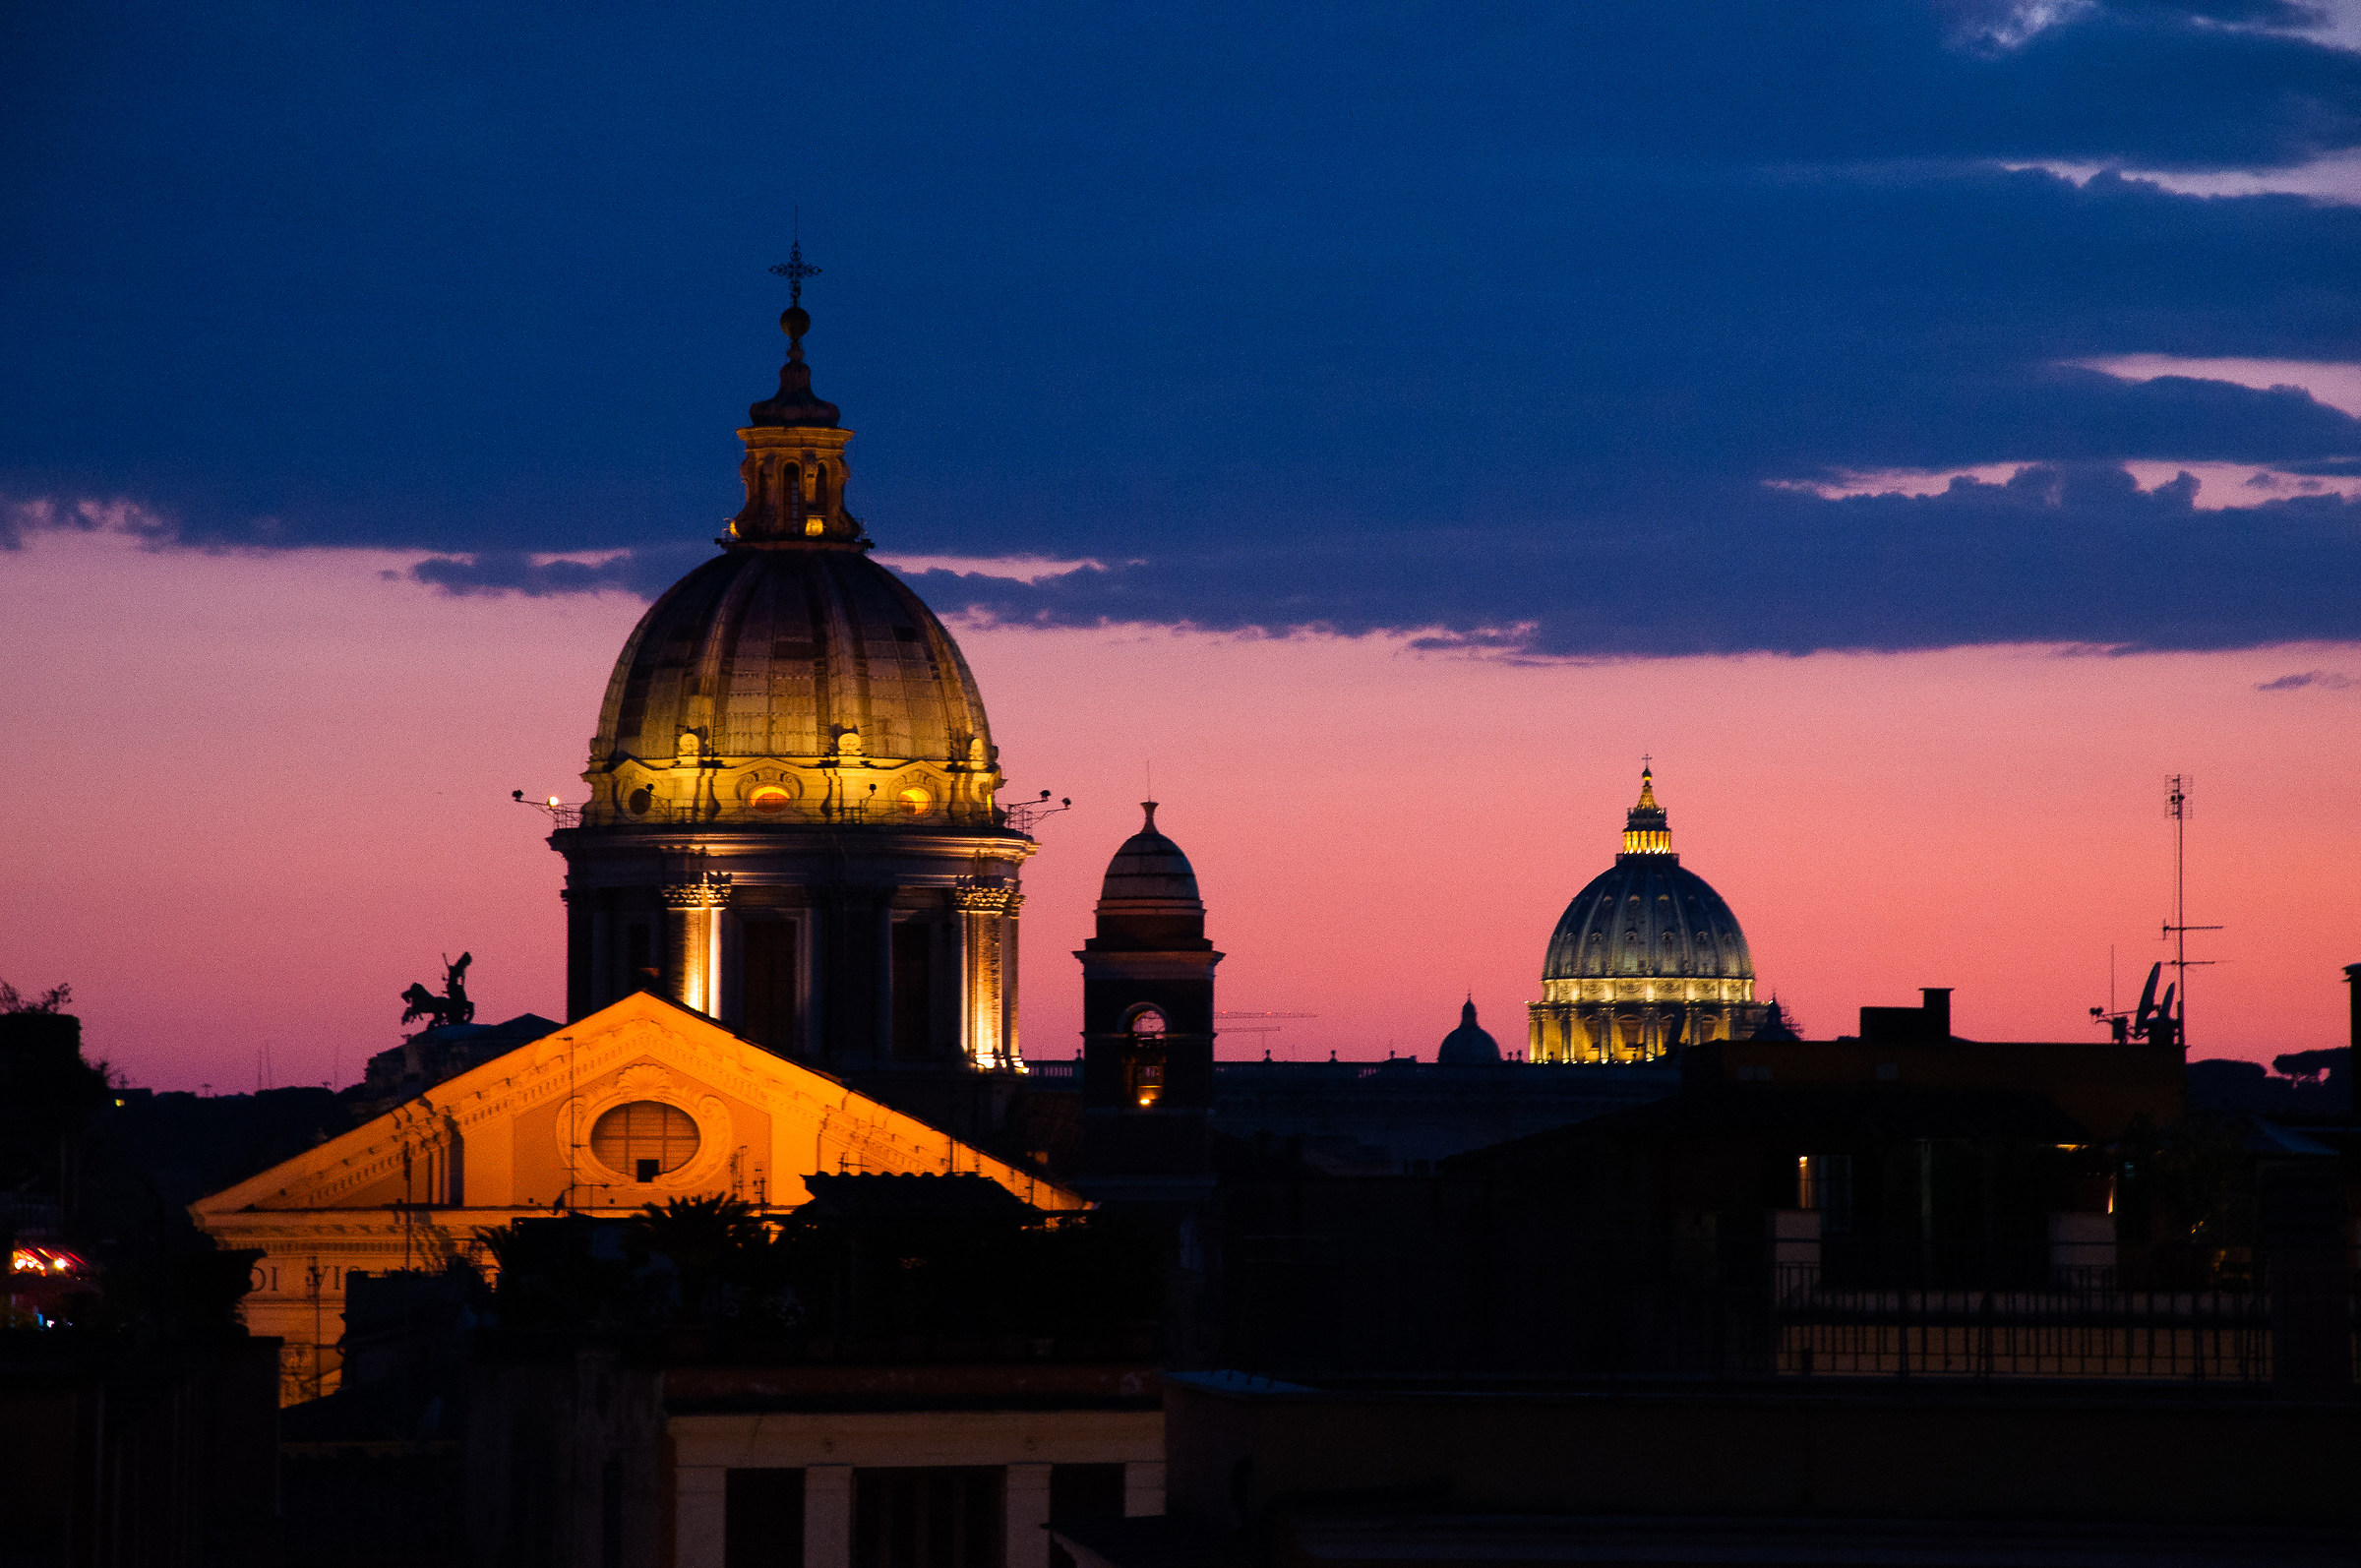 Rome at sunset...